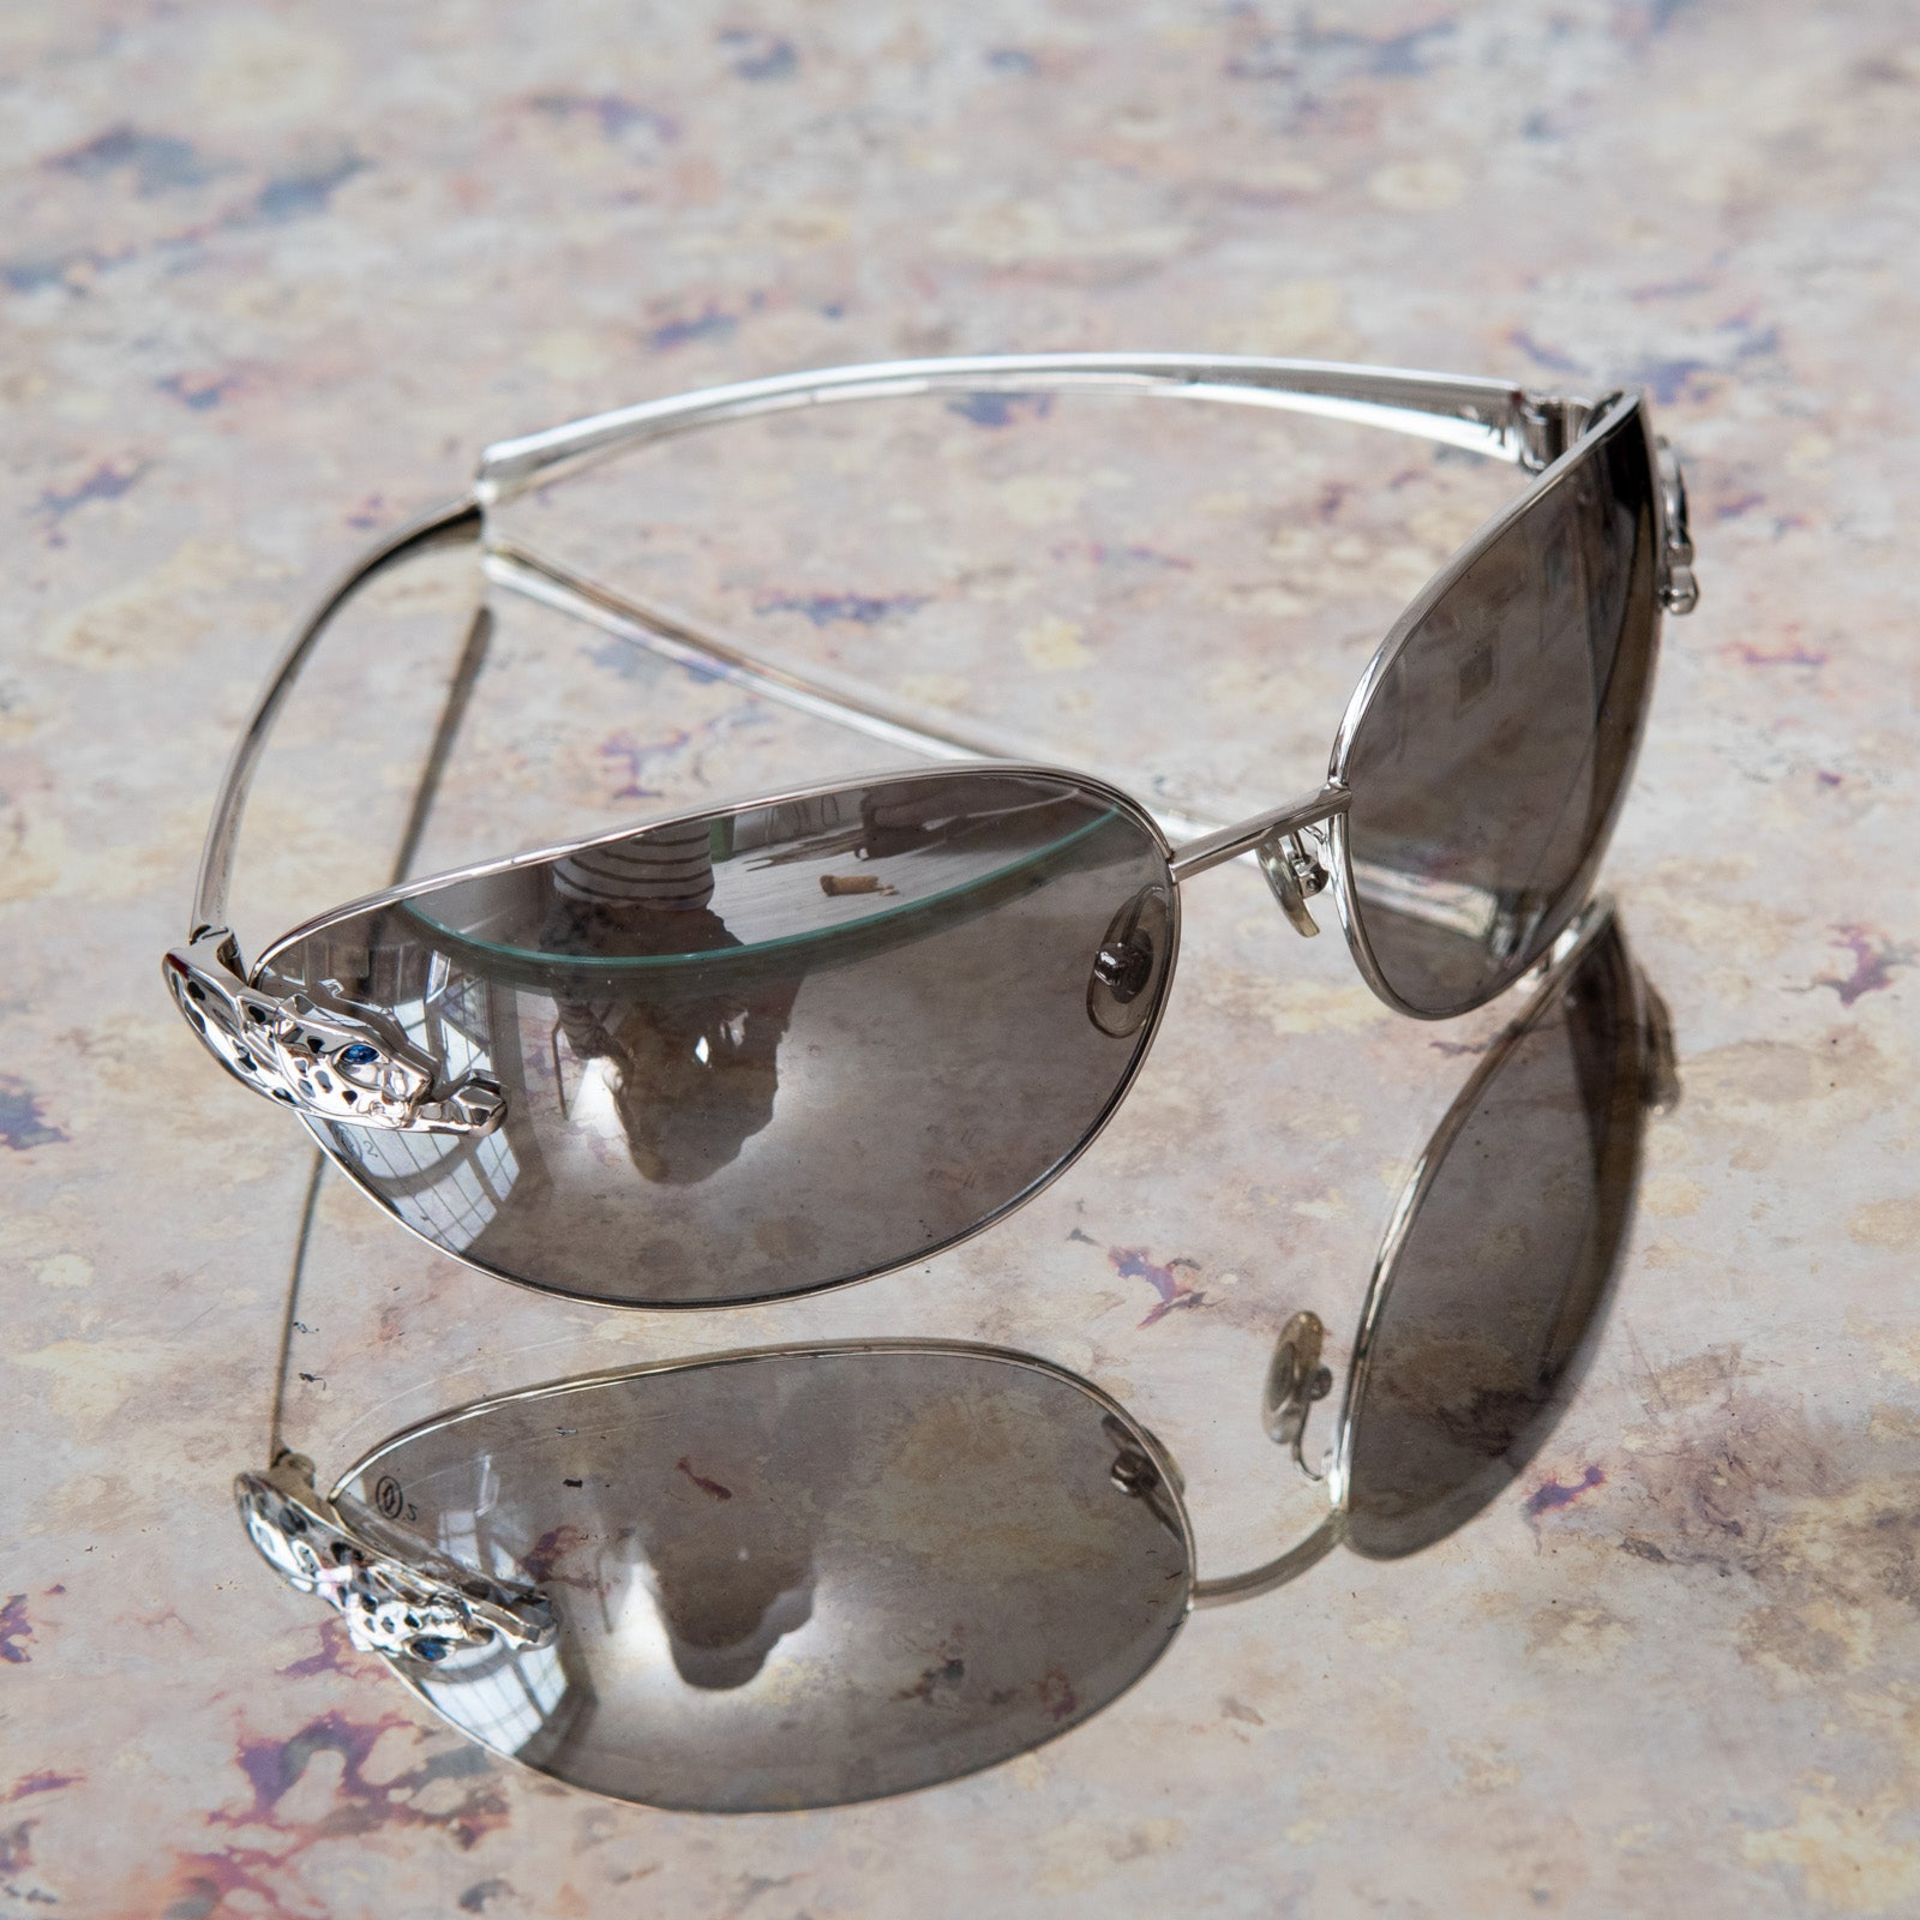 Cartier Vintage Limited Edition Panthere de Aviator Sunglasses - Image 4 of 8